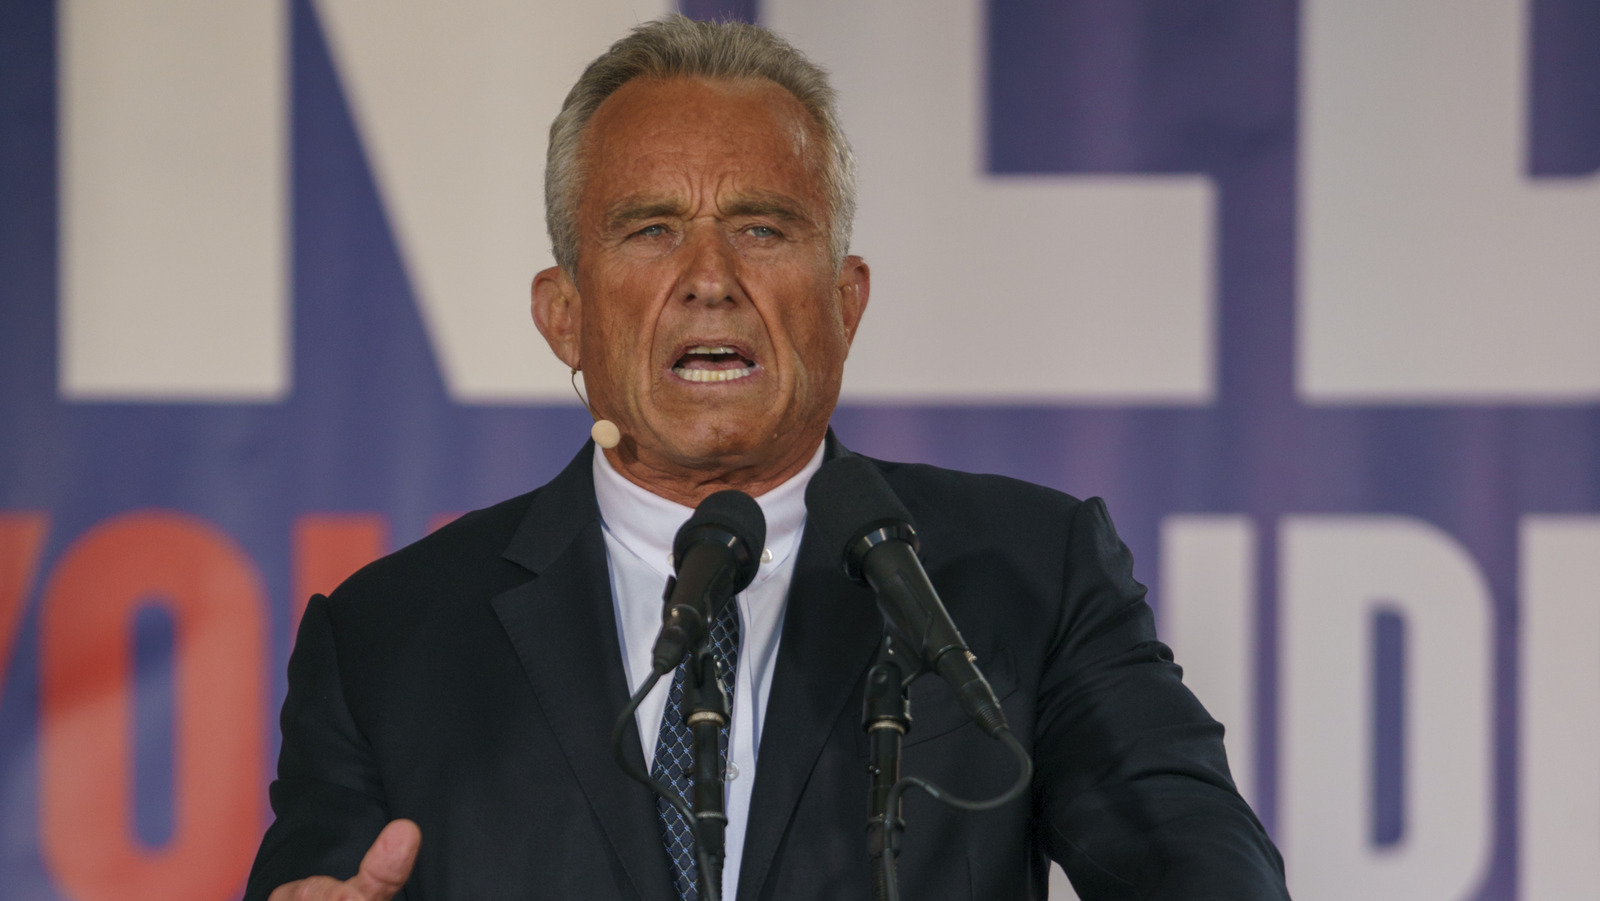 Robert F. Kennedy Jr.'s Family Hits Him Where It Hurts In Response To